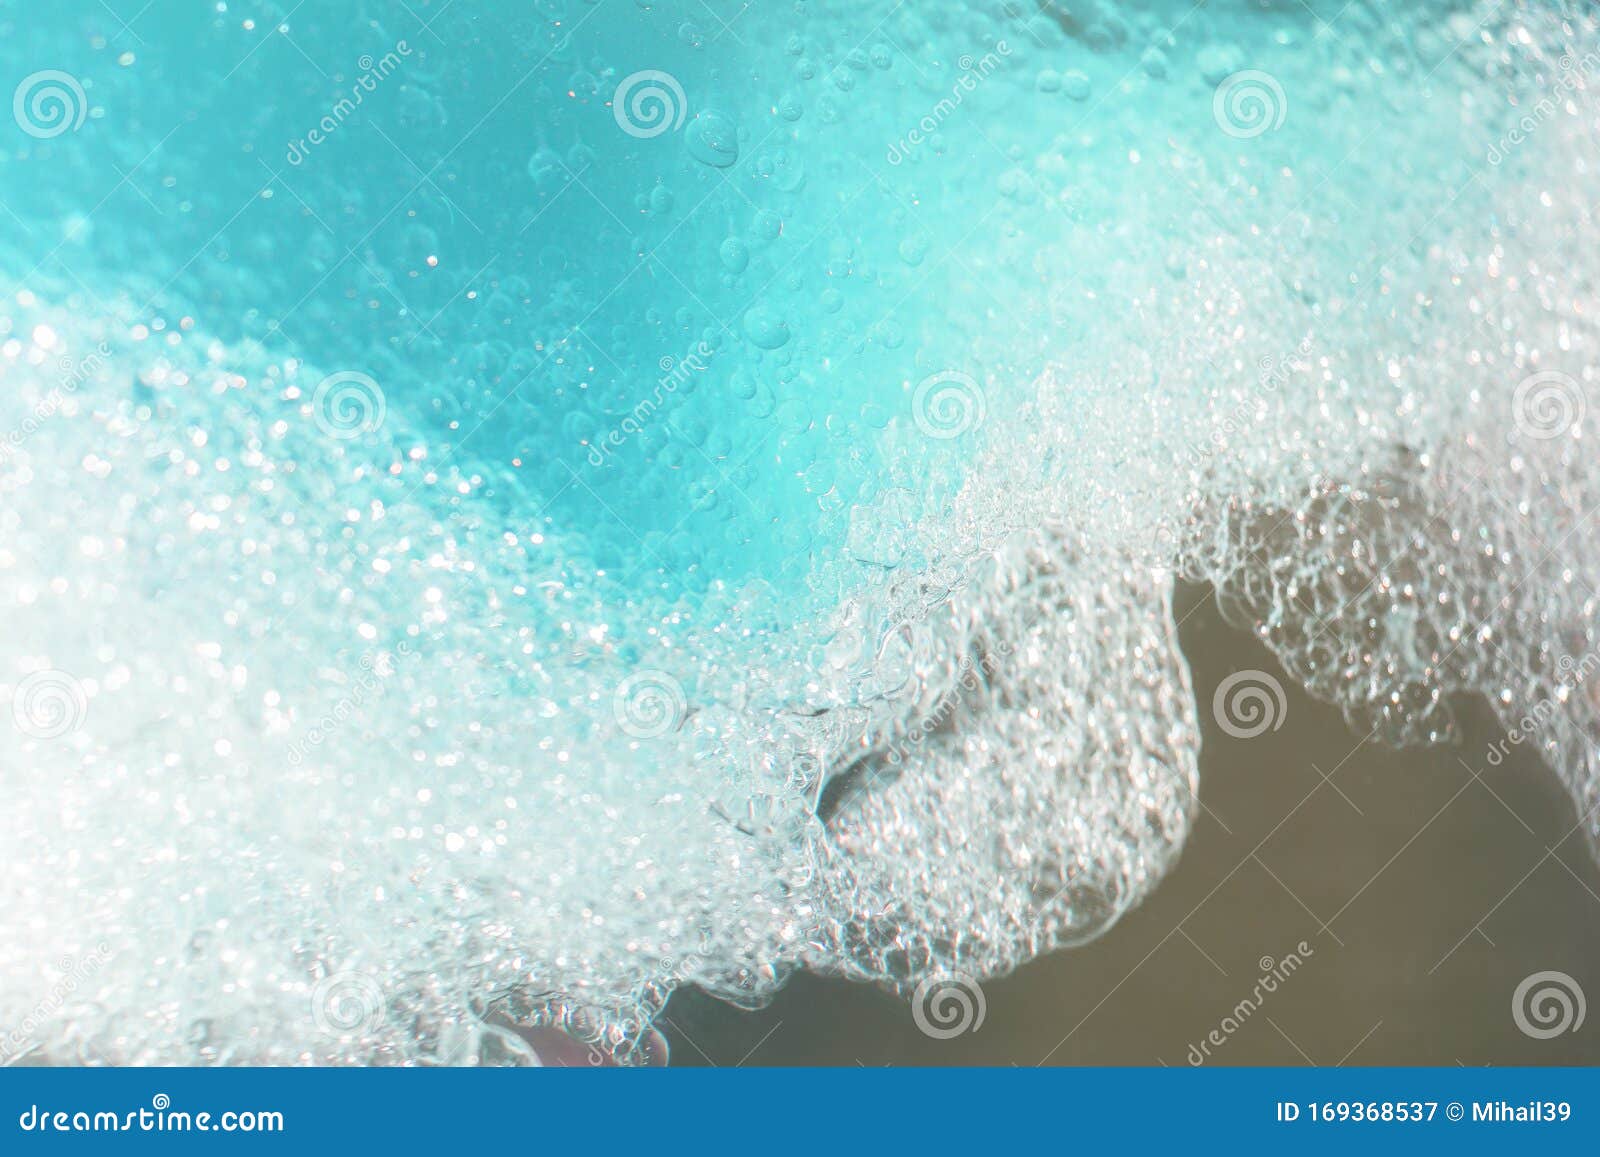 Blue Water with Bubbles and Blue Drops Background Stock Image - Image ...